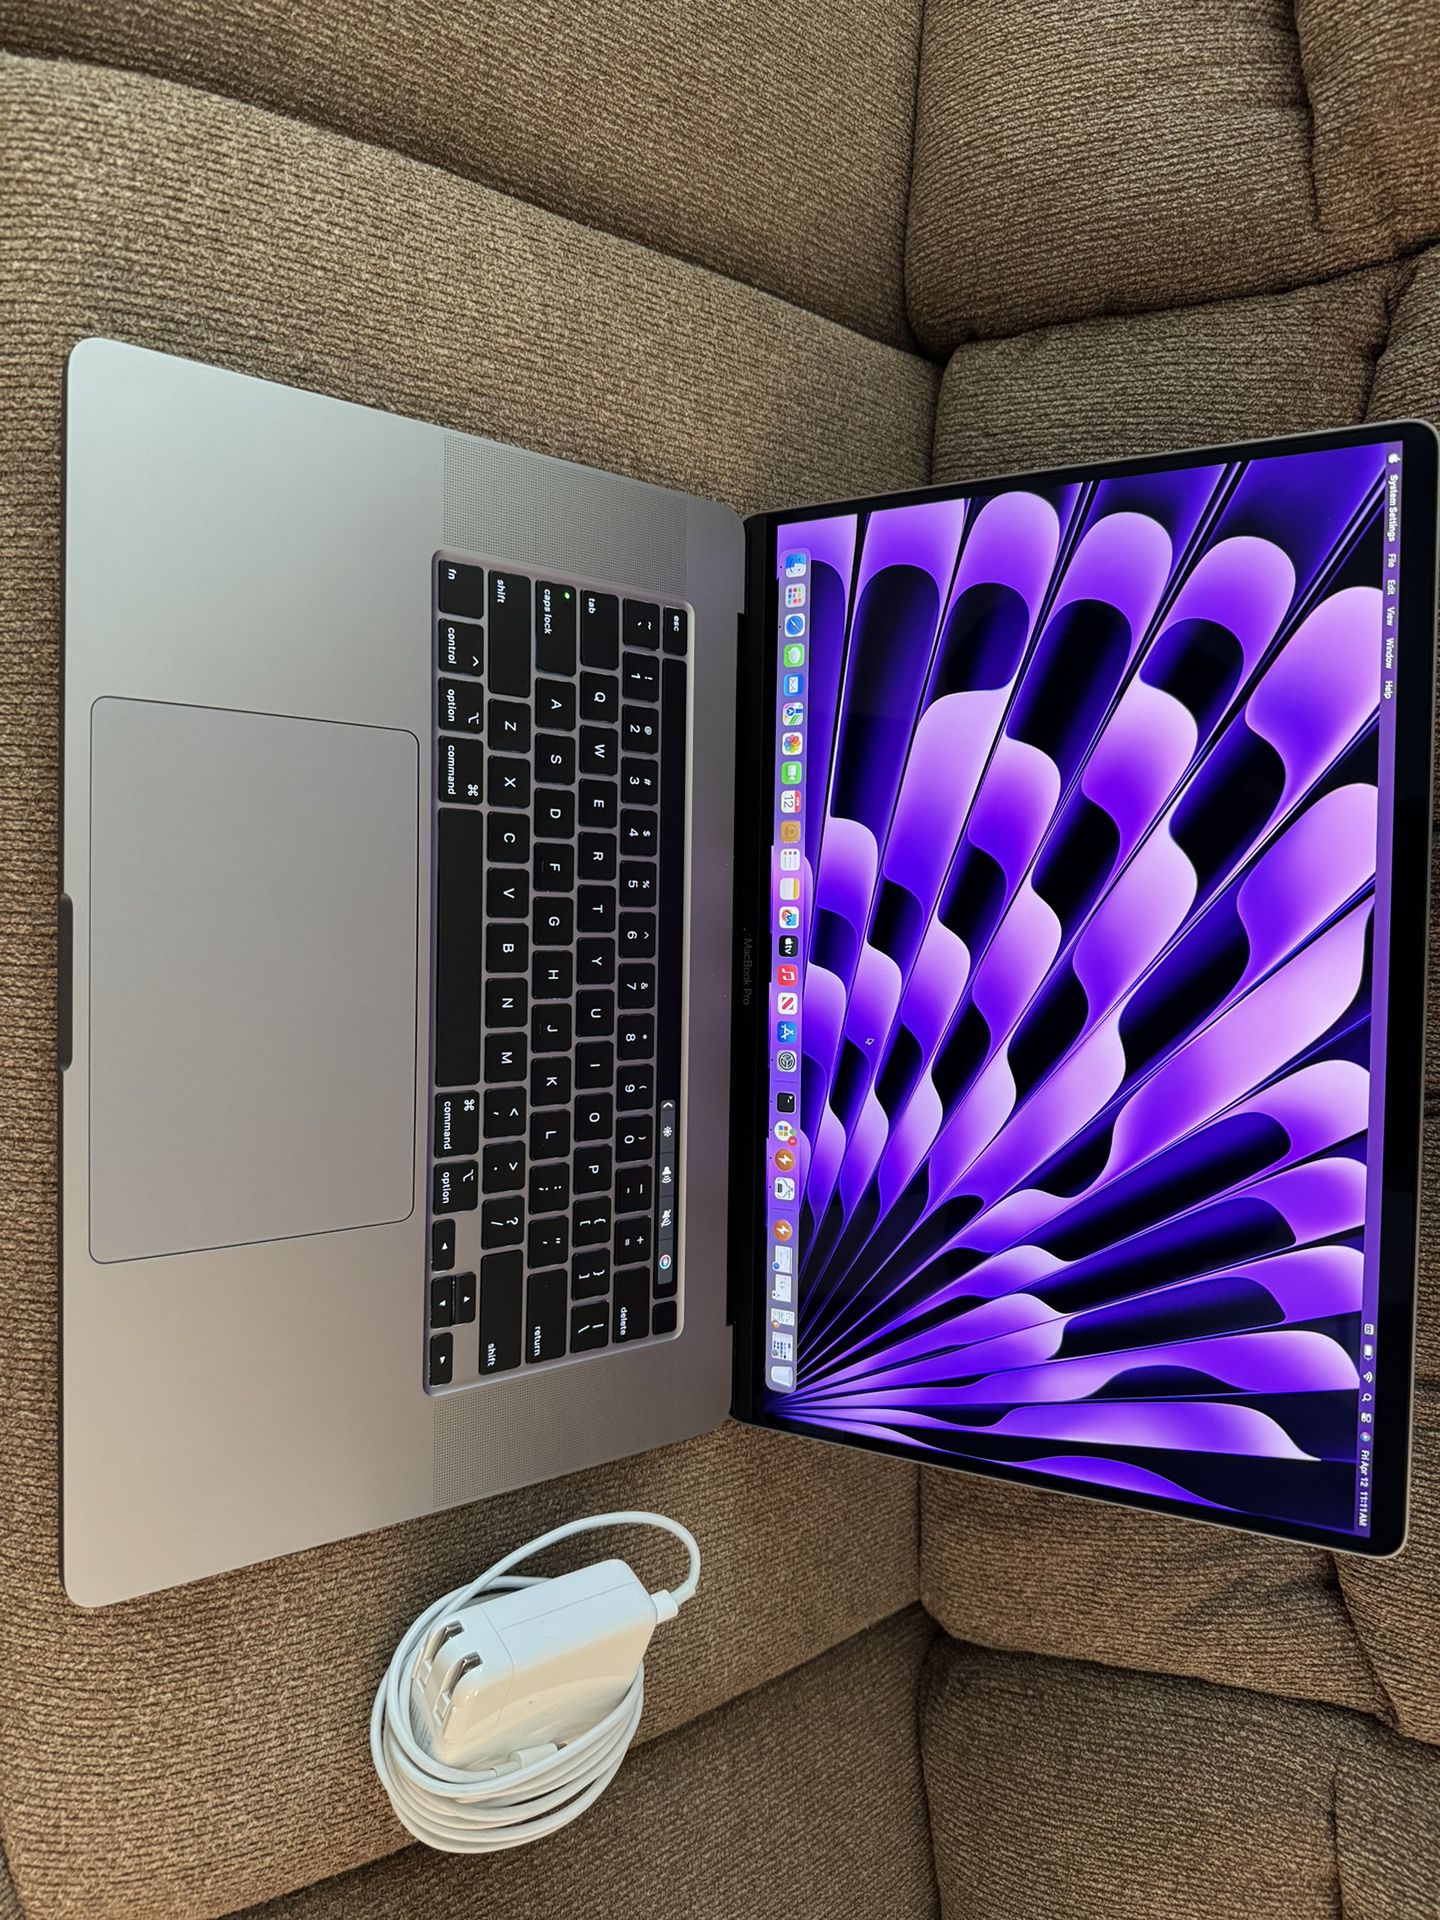 2019/2020 MacBook Pro 16”, i7 2.6ghz 6 Cores, 32gb ram,512gb.4GB graphic,81 Battery Cycles, Excellen